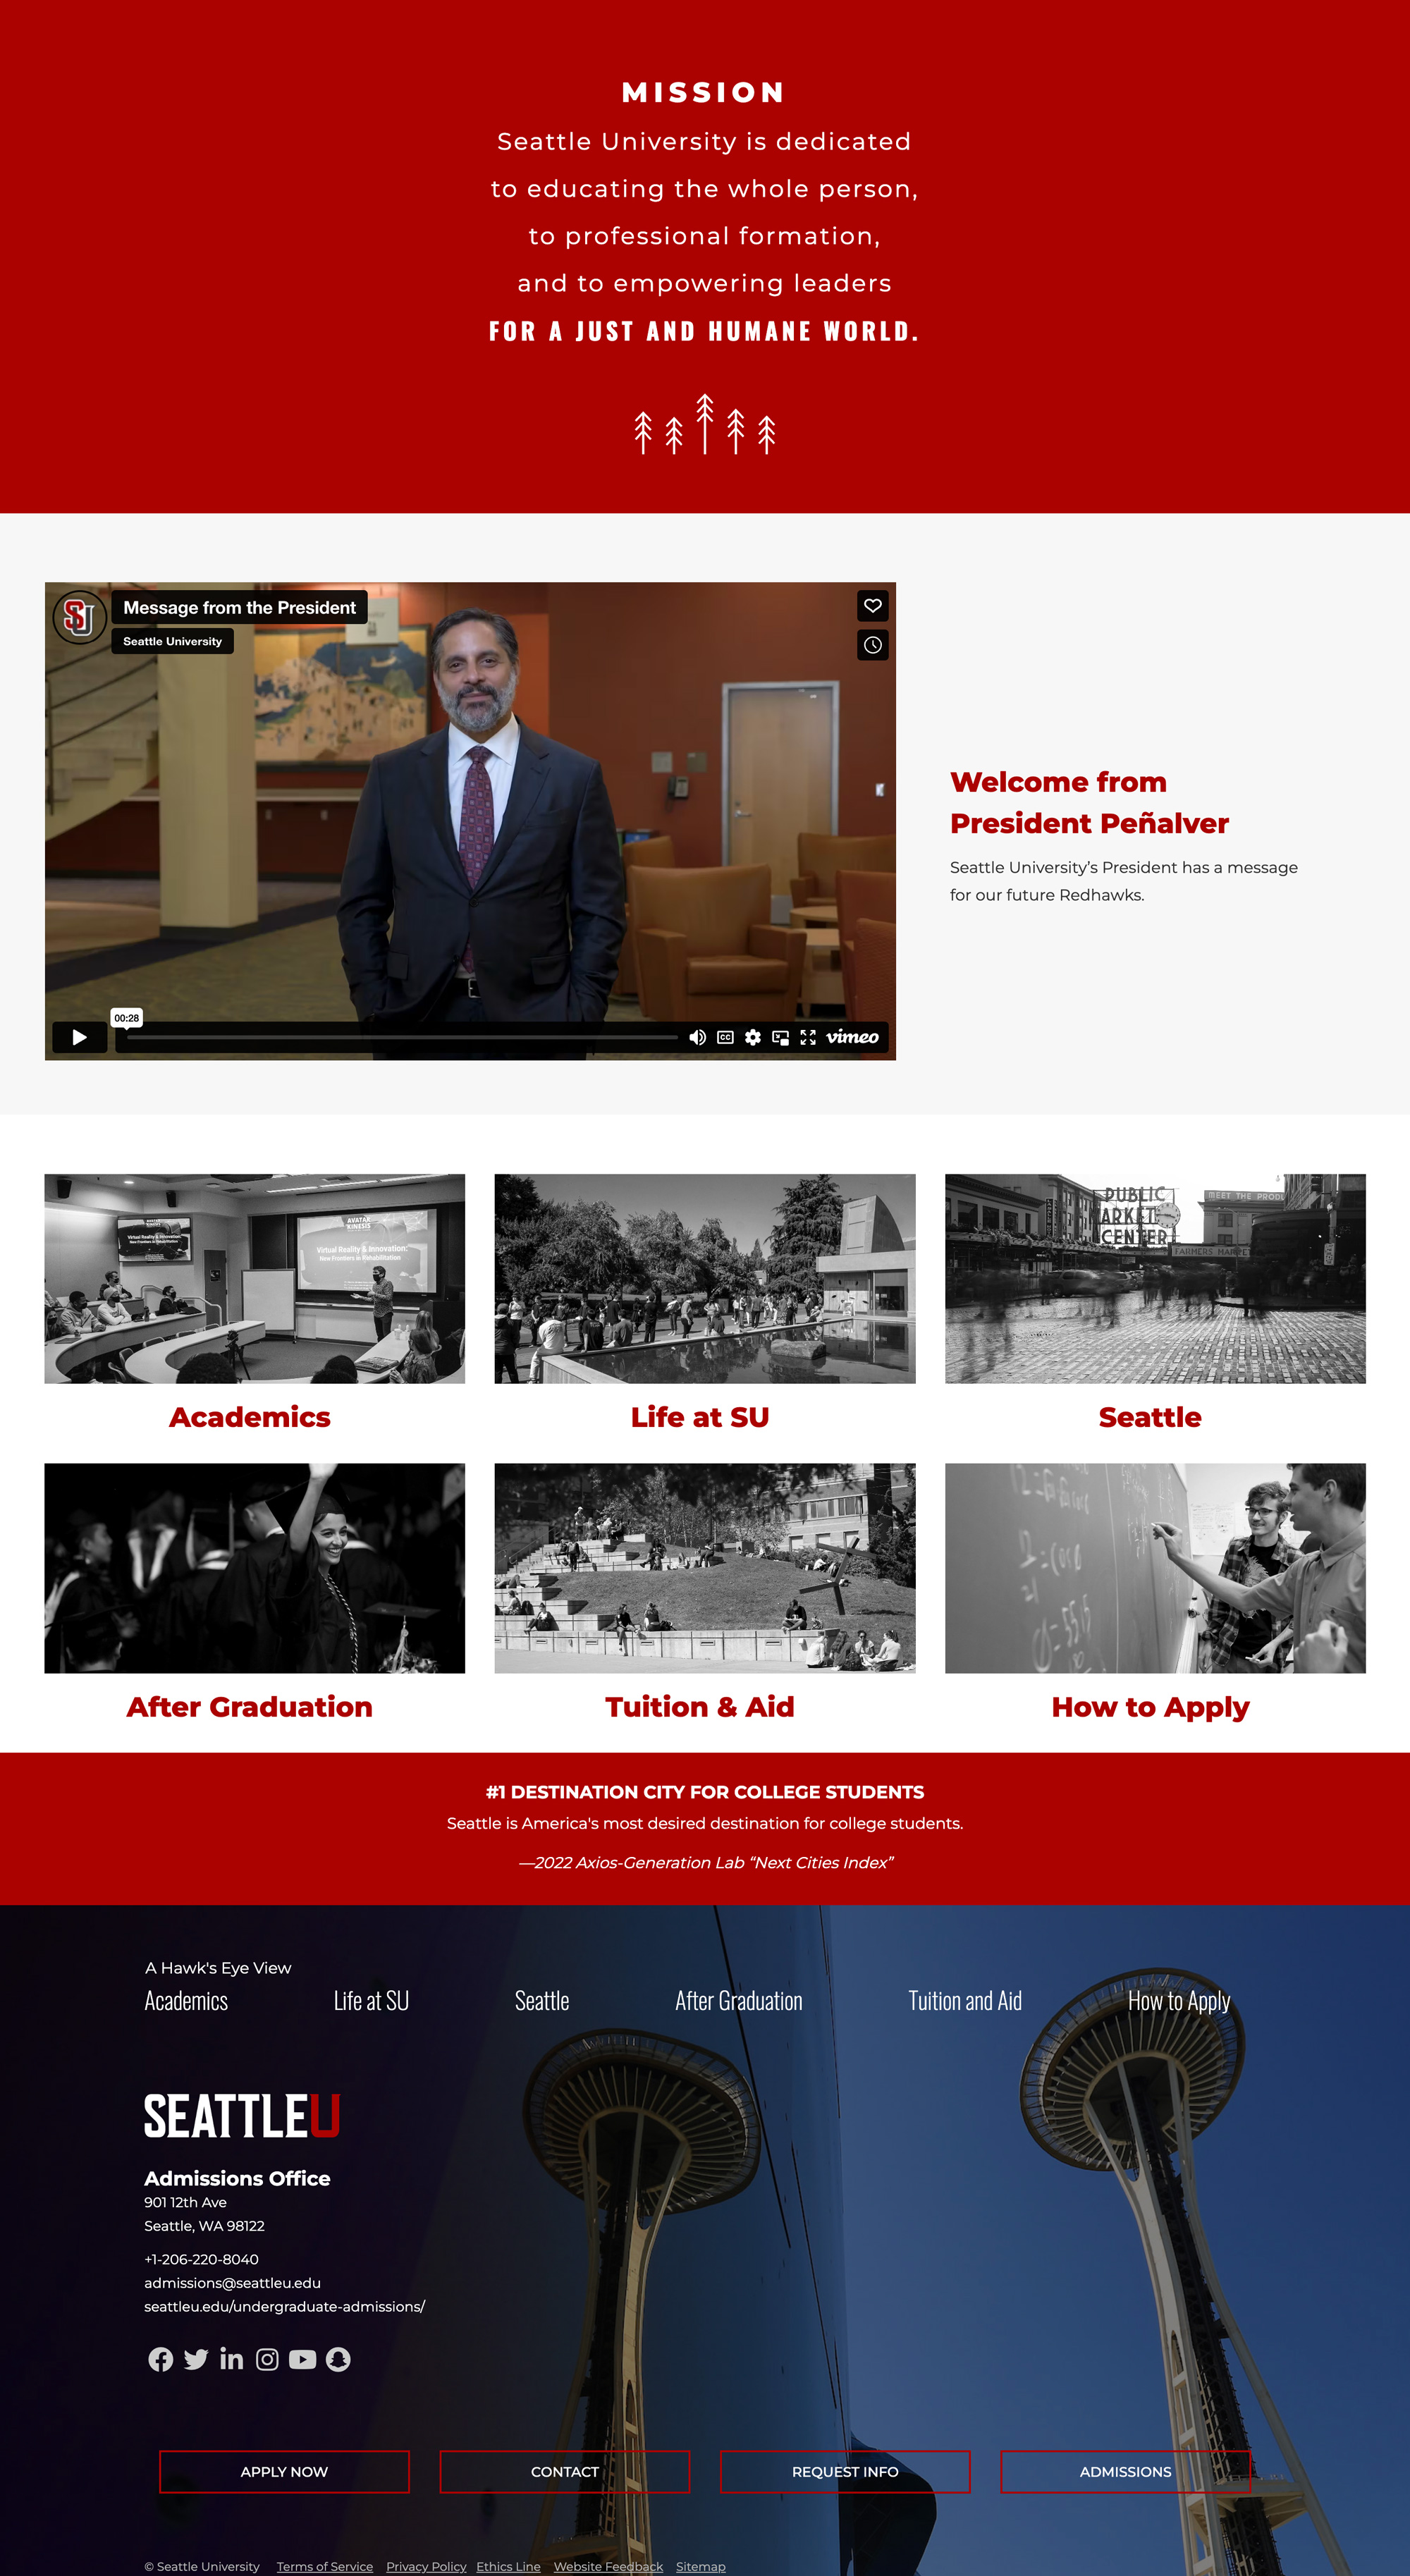 The rest of the viewbook landing page with mission statement, president's welcome video, and site menu